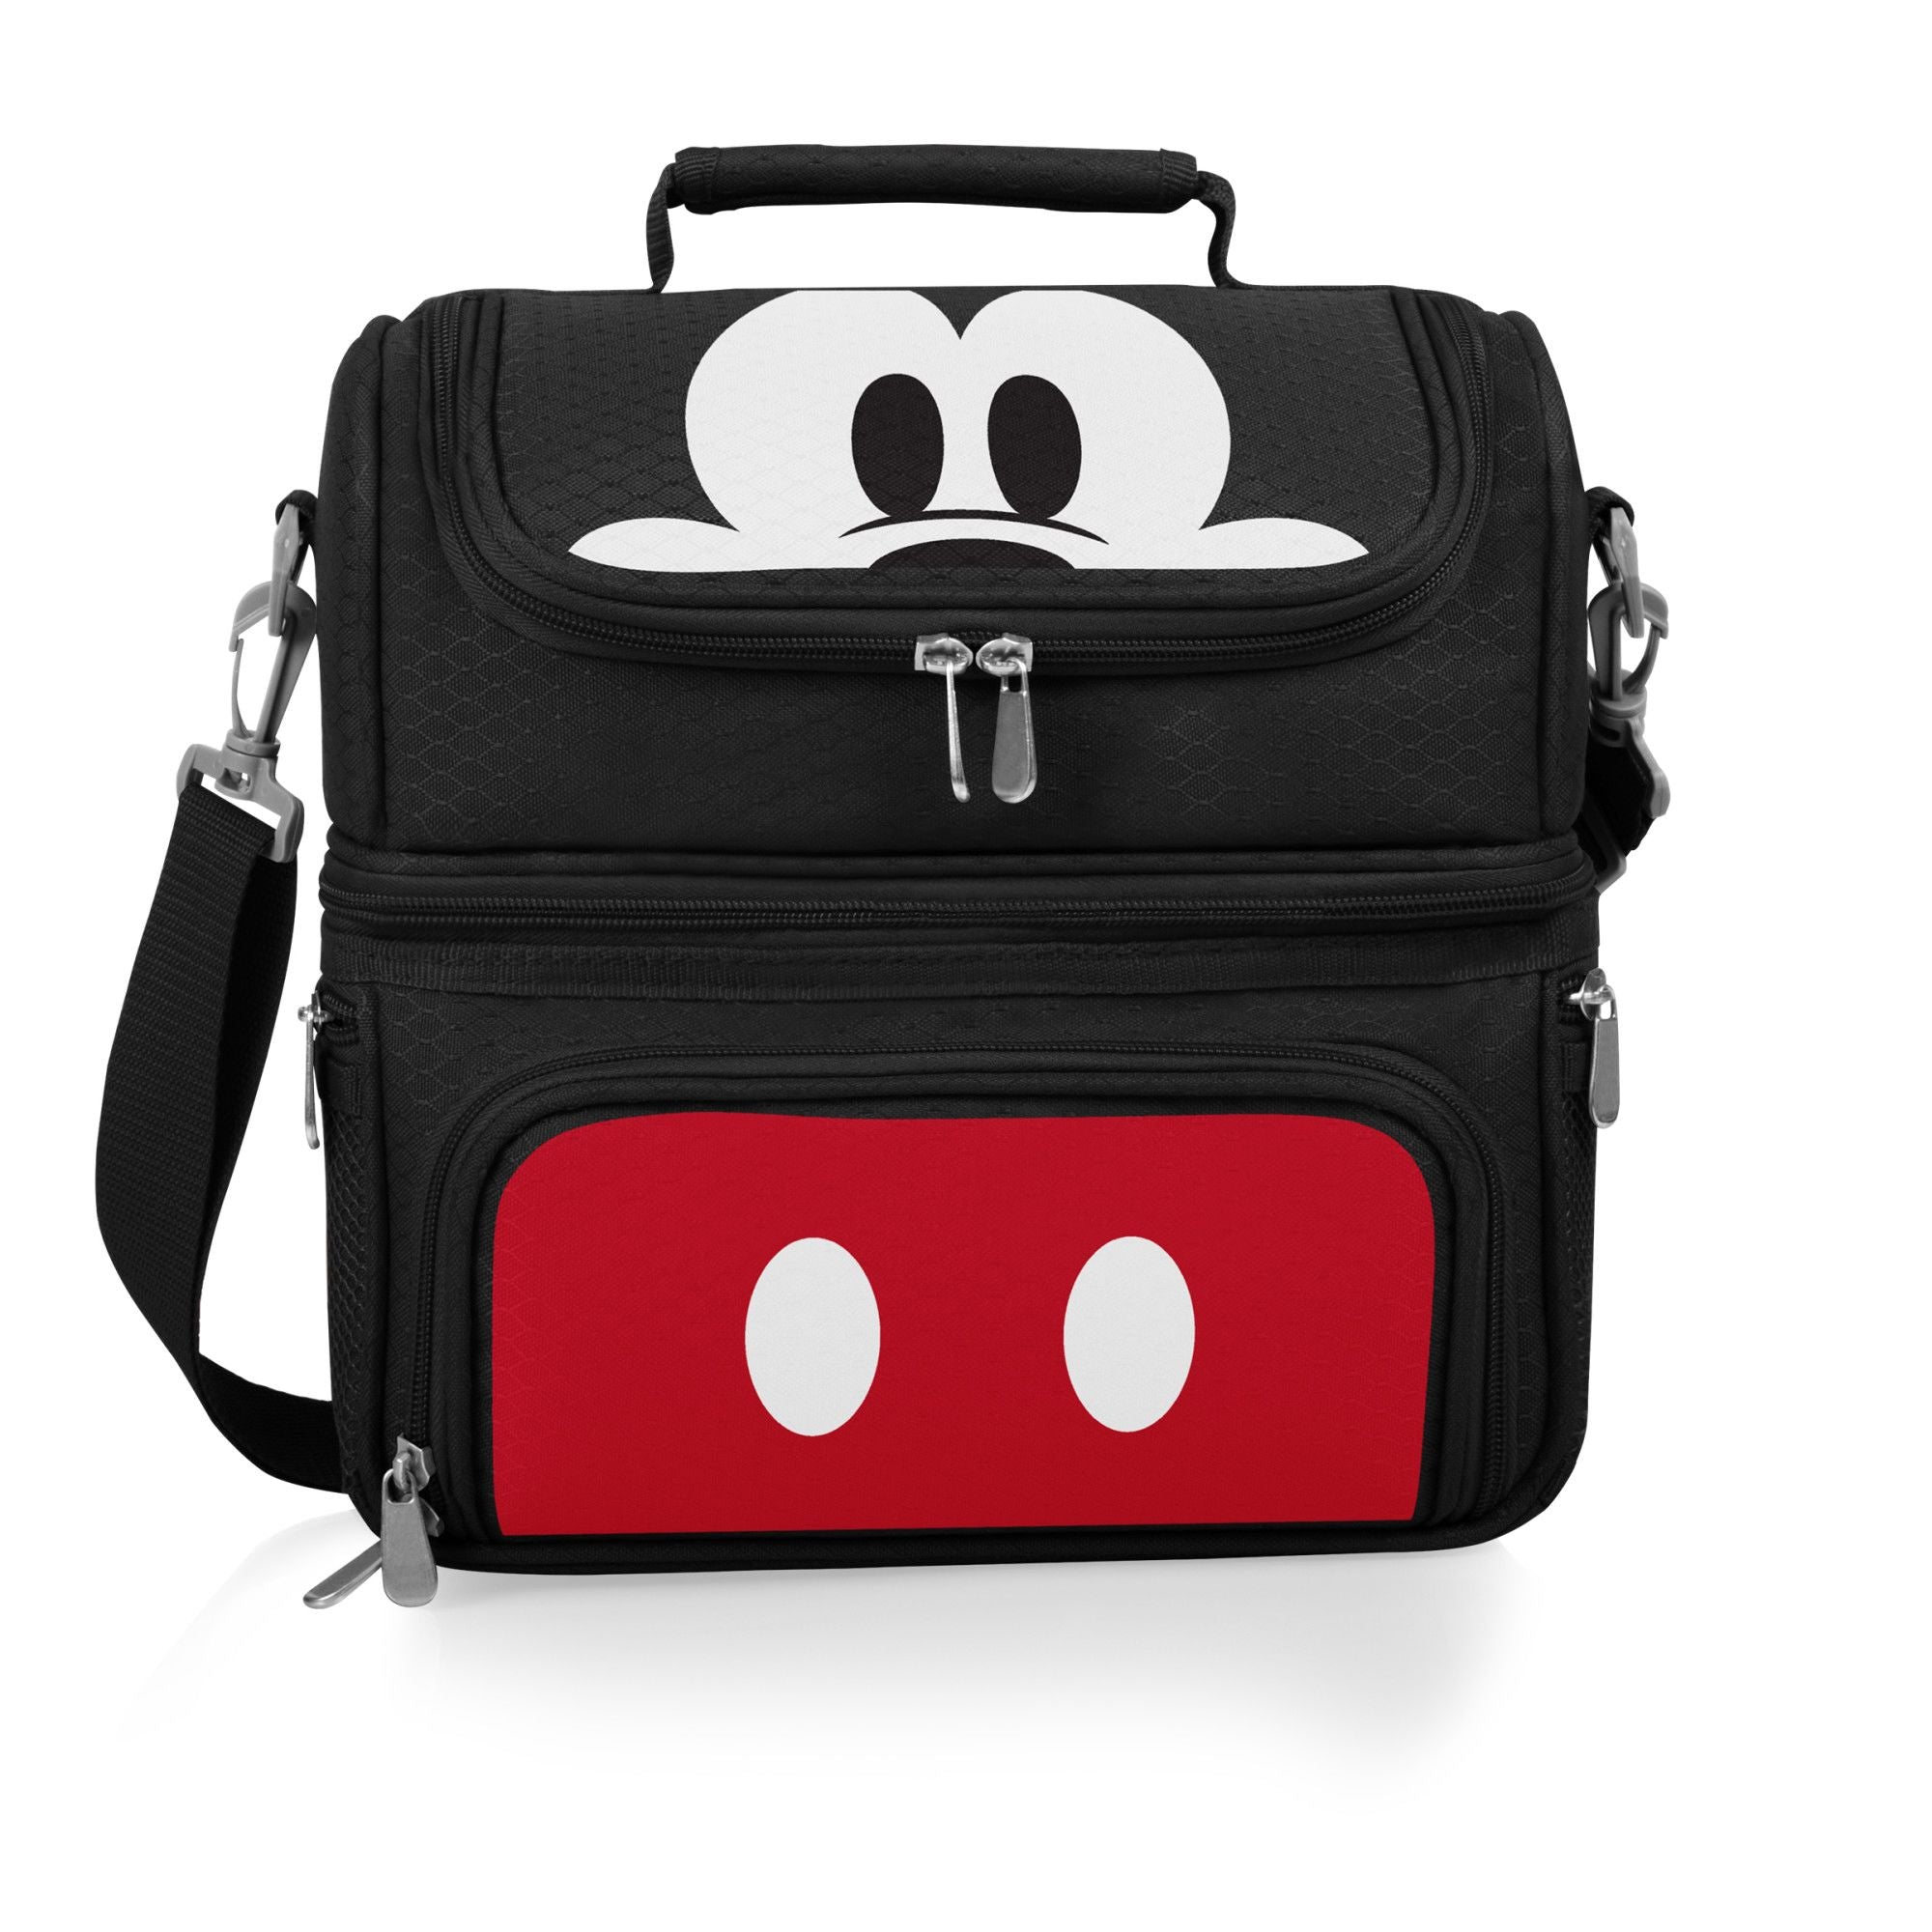 Mickey Mouse Pranzo Lunch Tote Bag (Black)